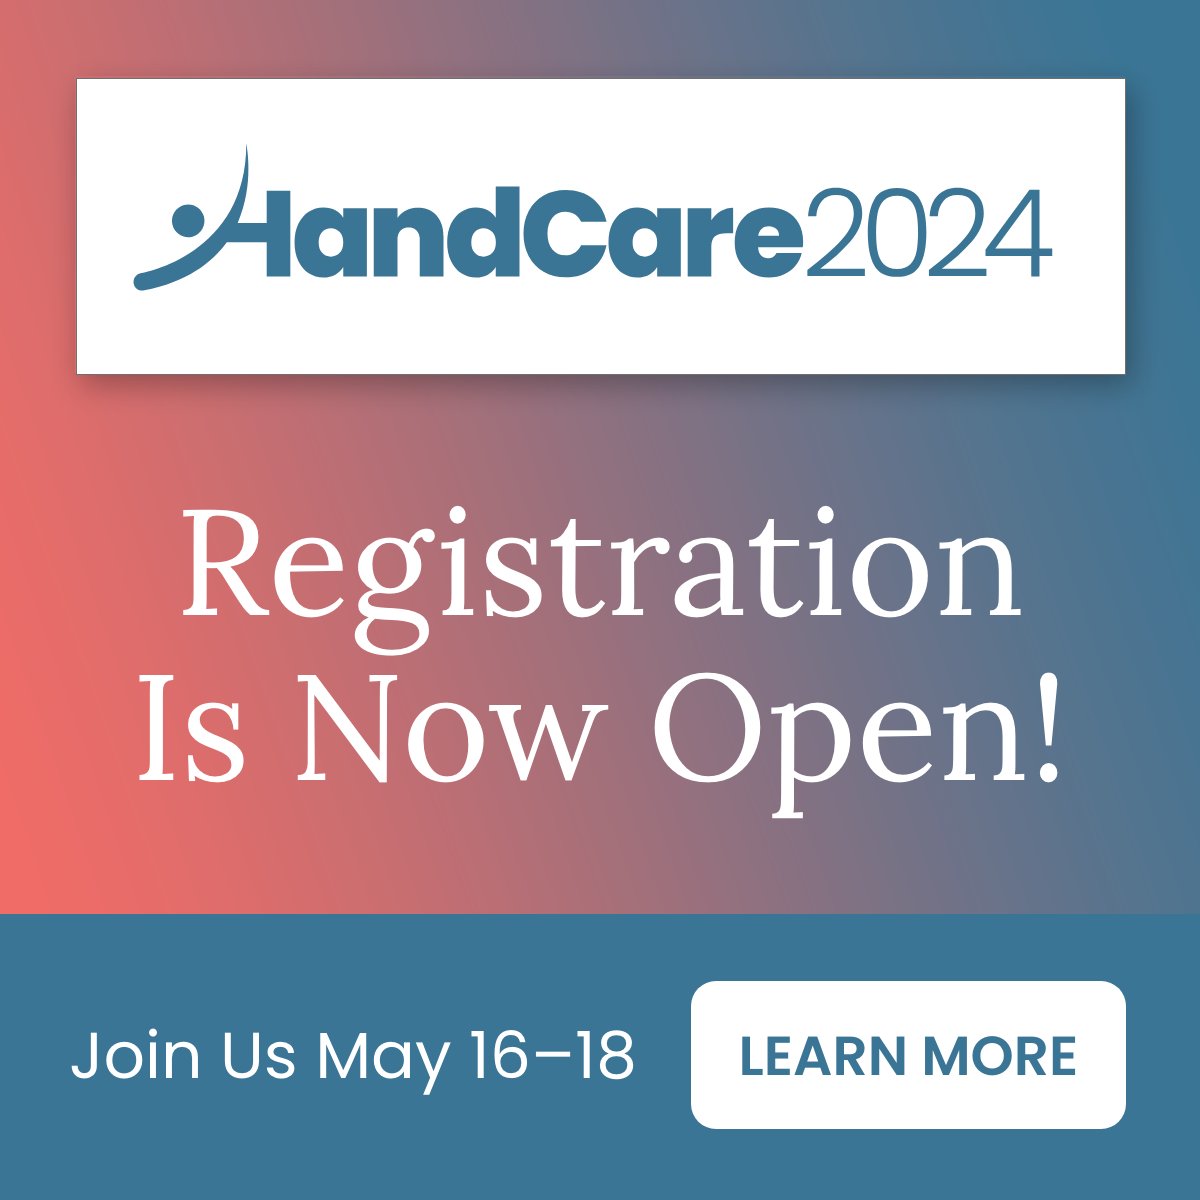 ⏰ Hand Care 2024 is just around the corner. If you are an OT/PT, physician, physician assistant, or nurse who is interested in hand rehabilitation, this conference is for you! Learn more → hubs.li/Q02kG5m40 #HandCare2024 #HandCareMeeting #HandCareConference